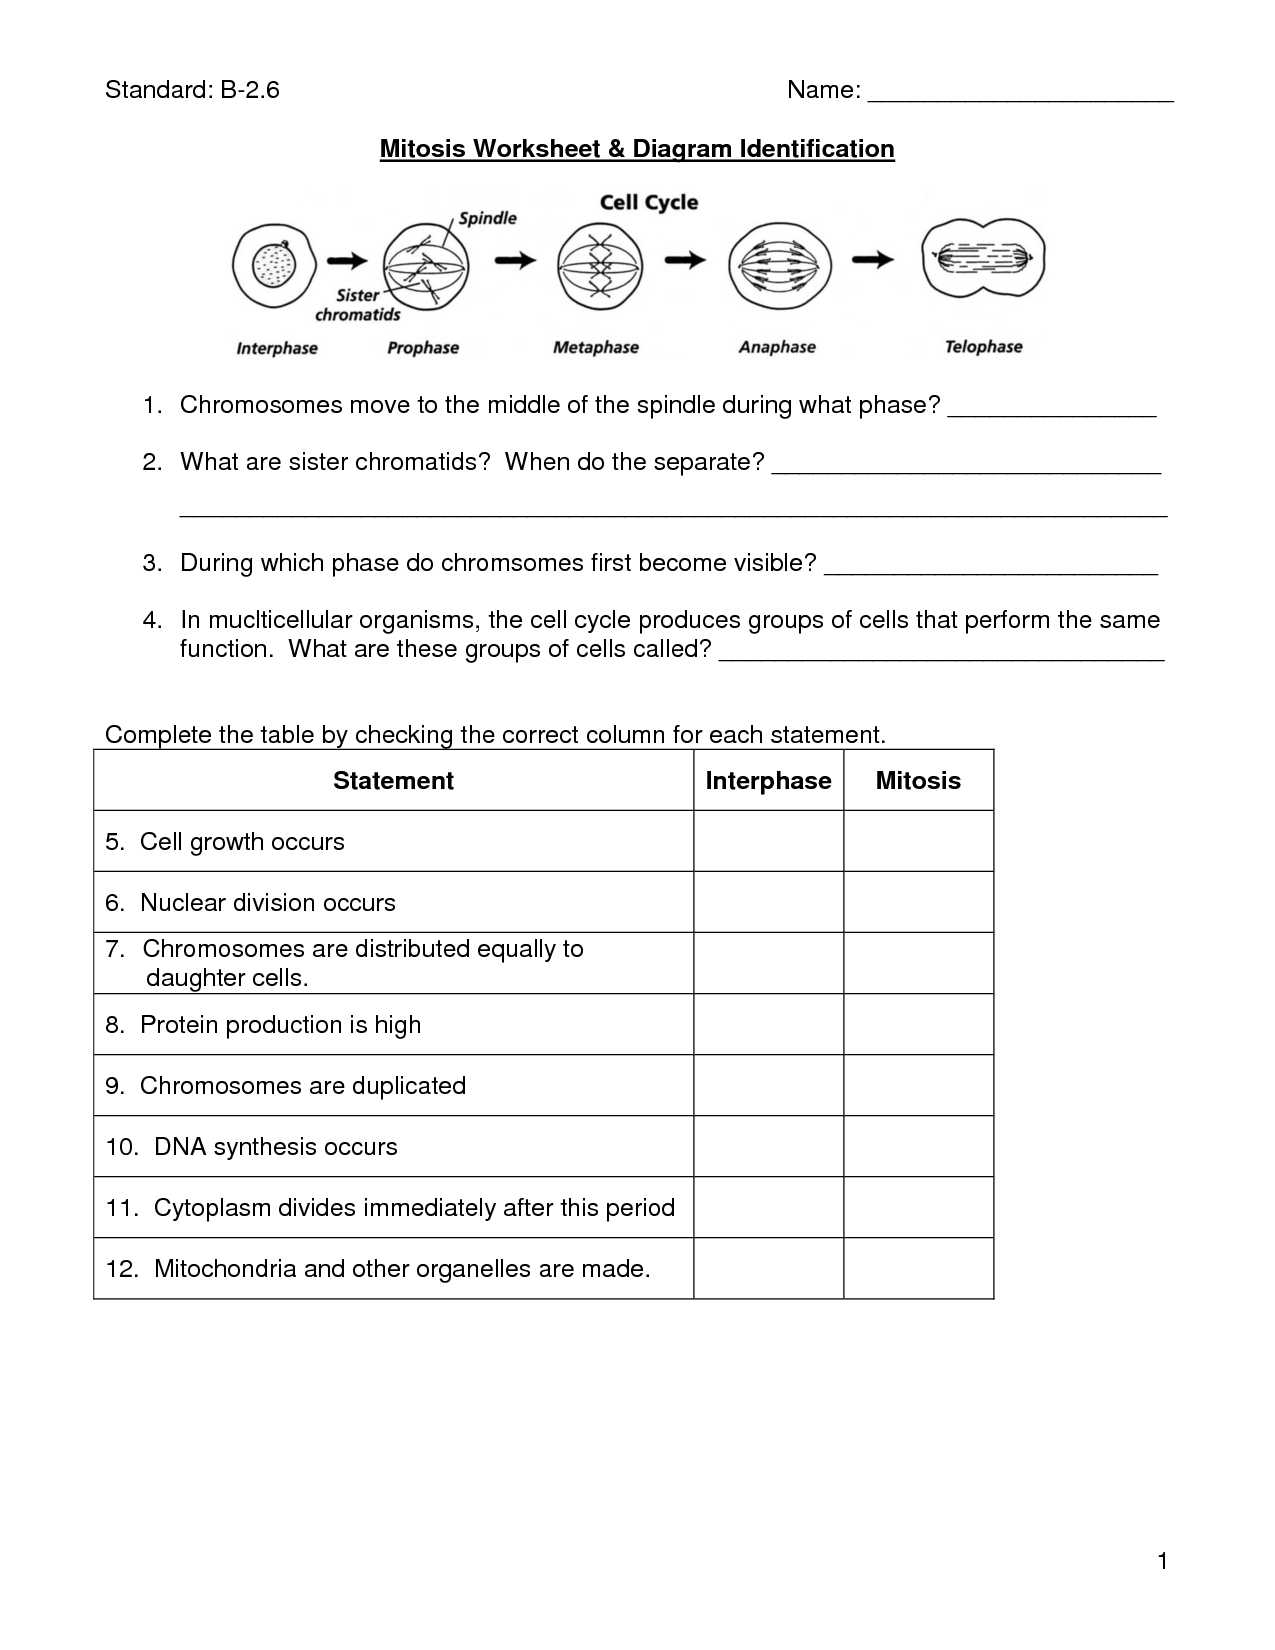 Patterns Of Inheritance Worksheet Along with Mitosis Worksheet Cells Synthesis Mitosis